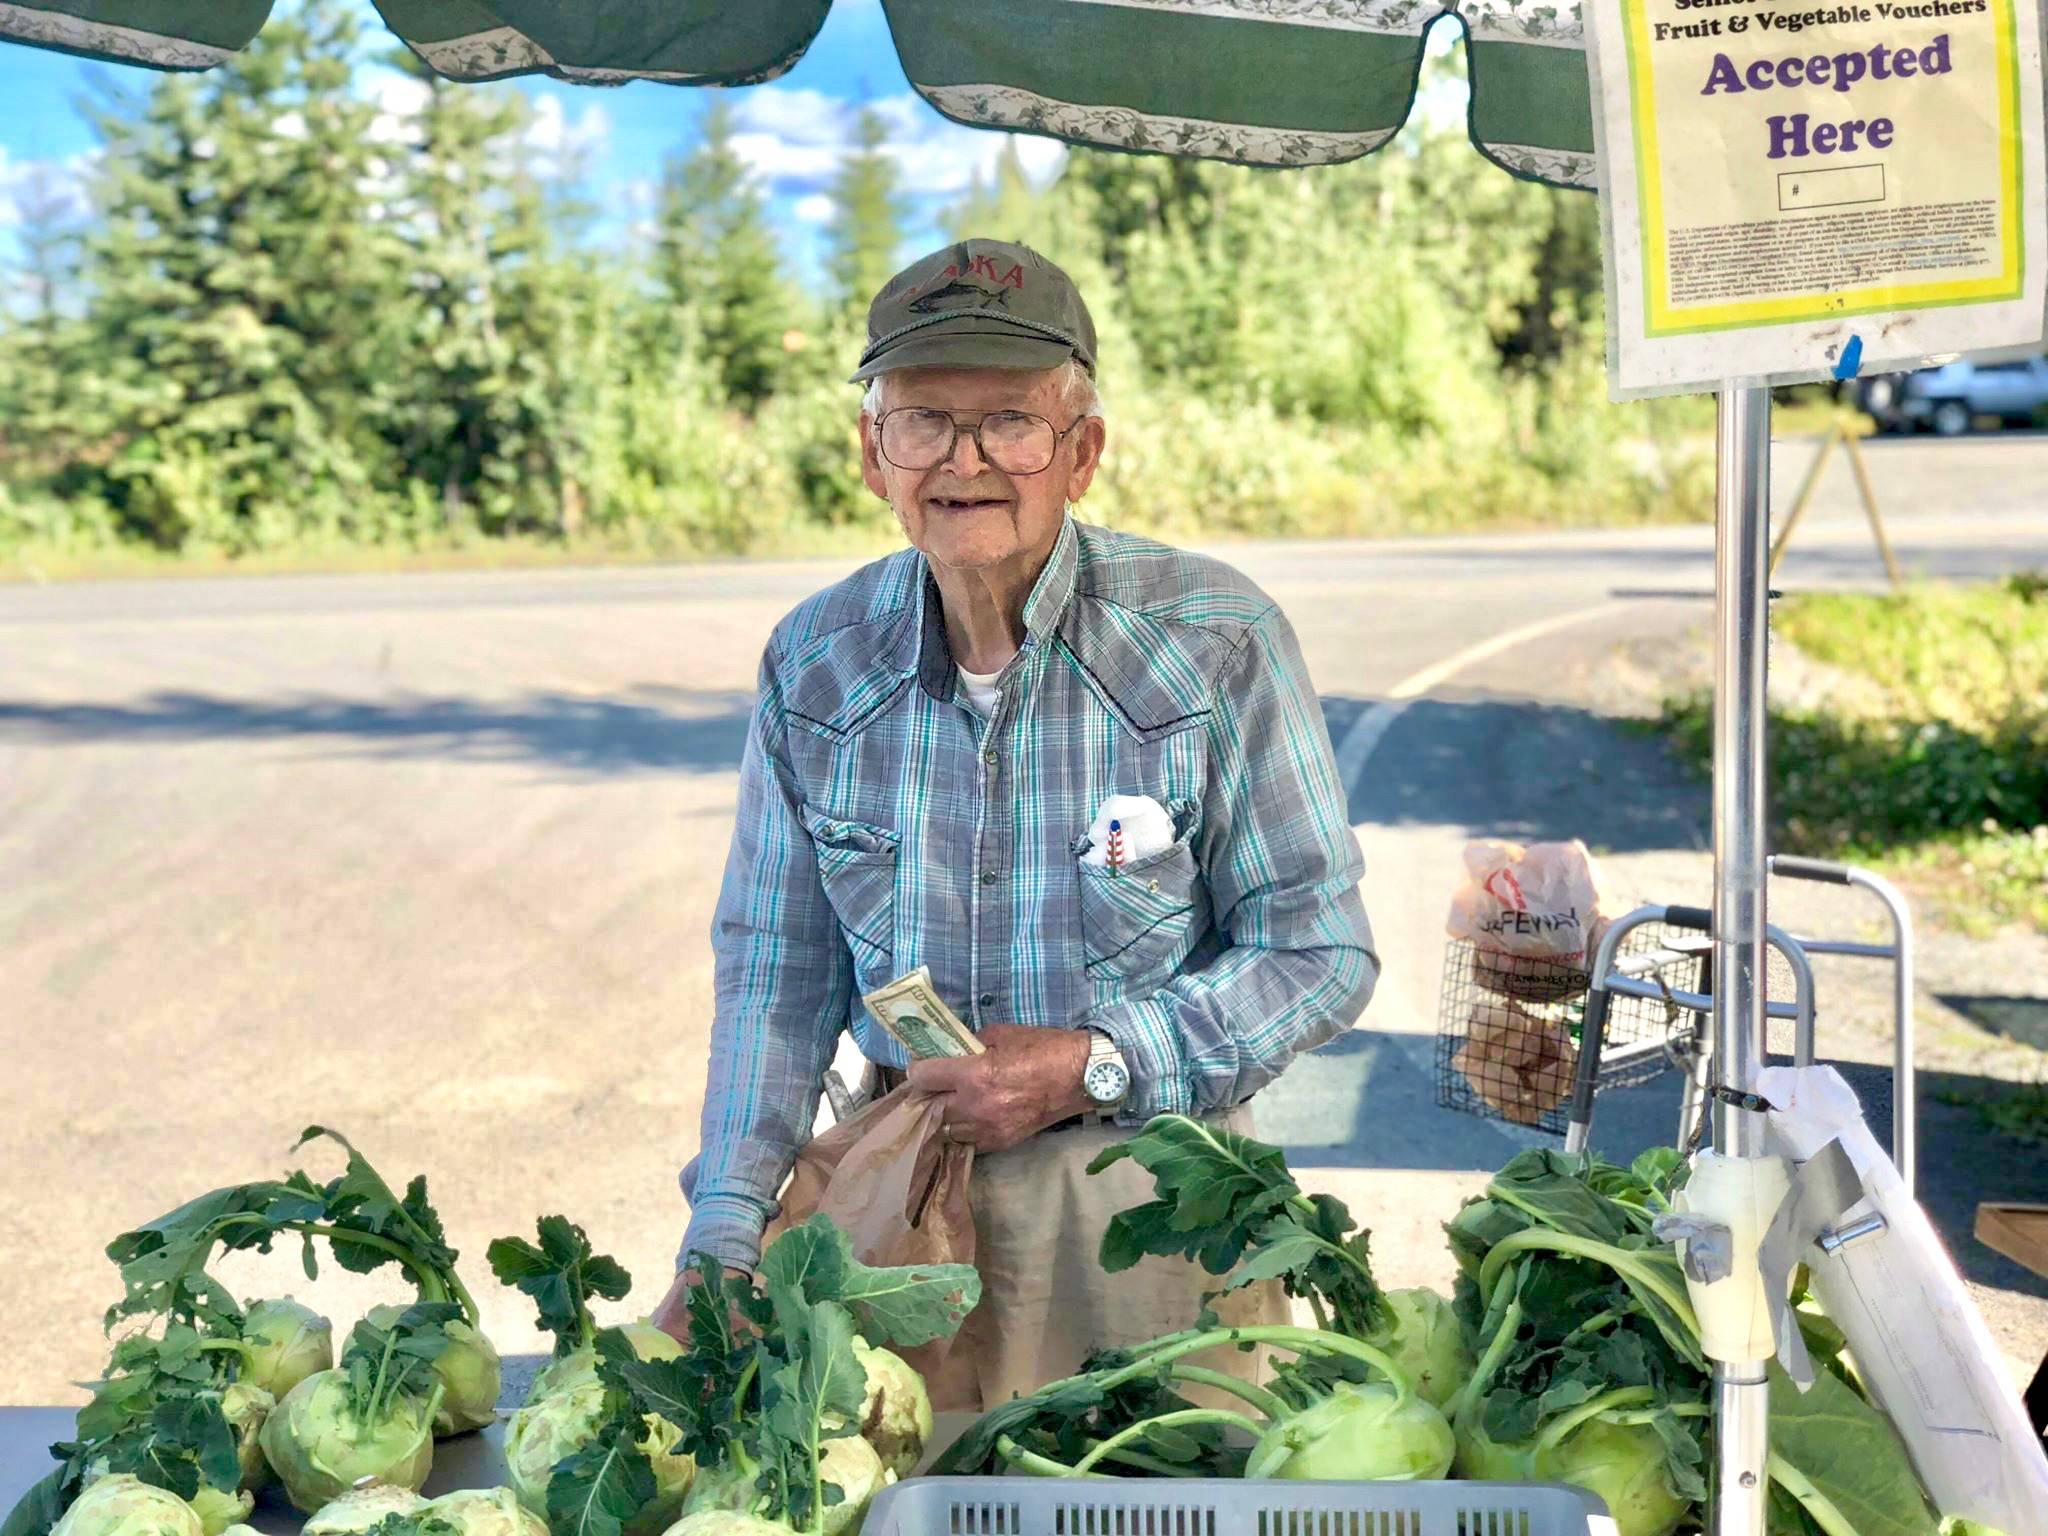 Dale Cocklin of Two Peas in a Pod Farm sells an abundance of root vegetables like beets, kohlrabi, carrots and more at his stand at the Tuesday, Aug. 28. 2018 Farmers Fresh Market at the Kenai Peninsula Food Bank, near Soldotna, Alaska. (Photo by Victoria Petersen/Peninsula Clarion)